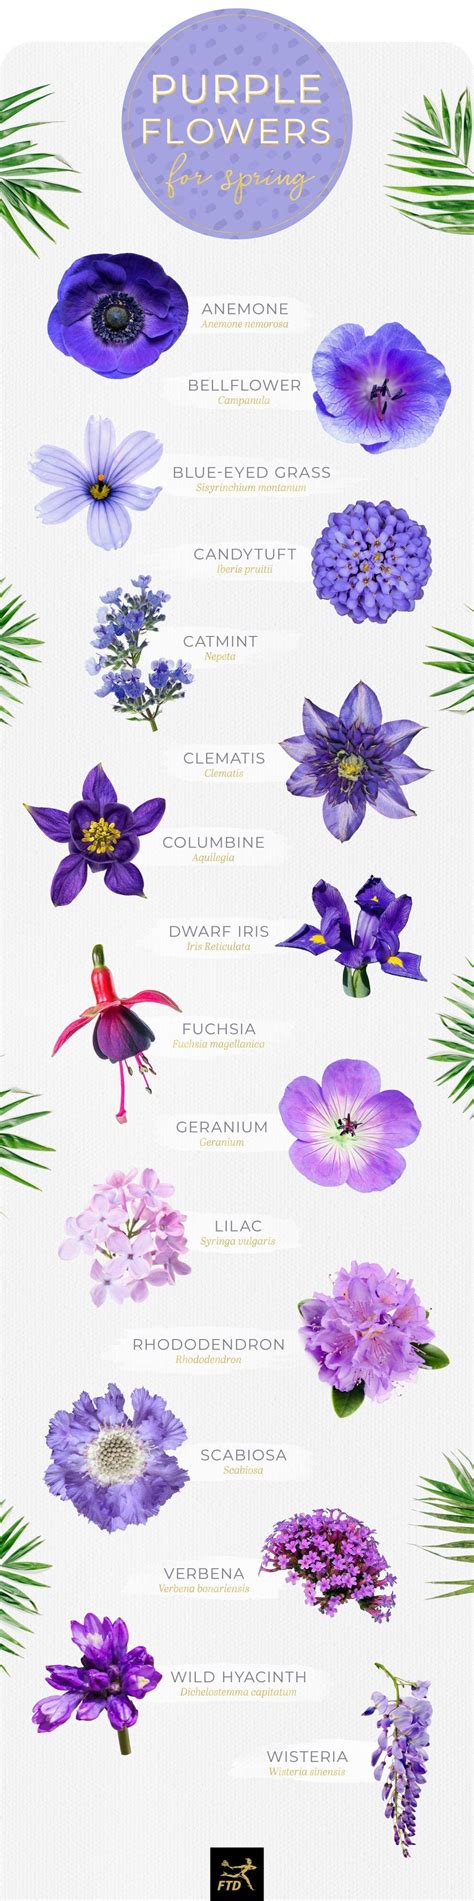 Light Purple Flowers Names And Pictures 62 Purple Flower Types With